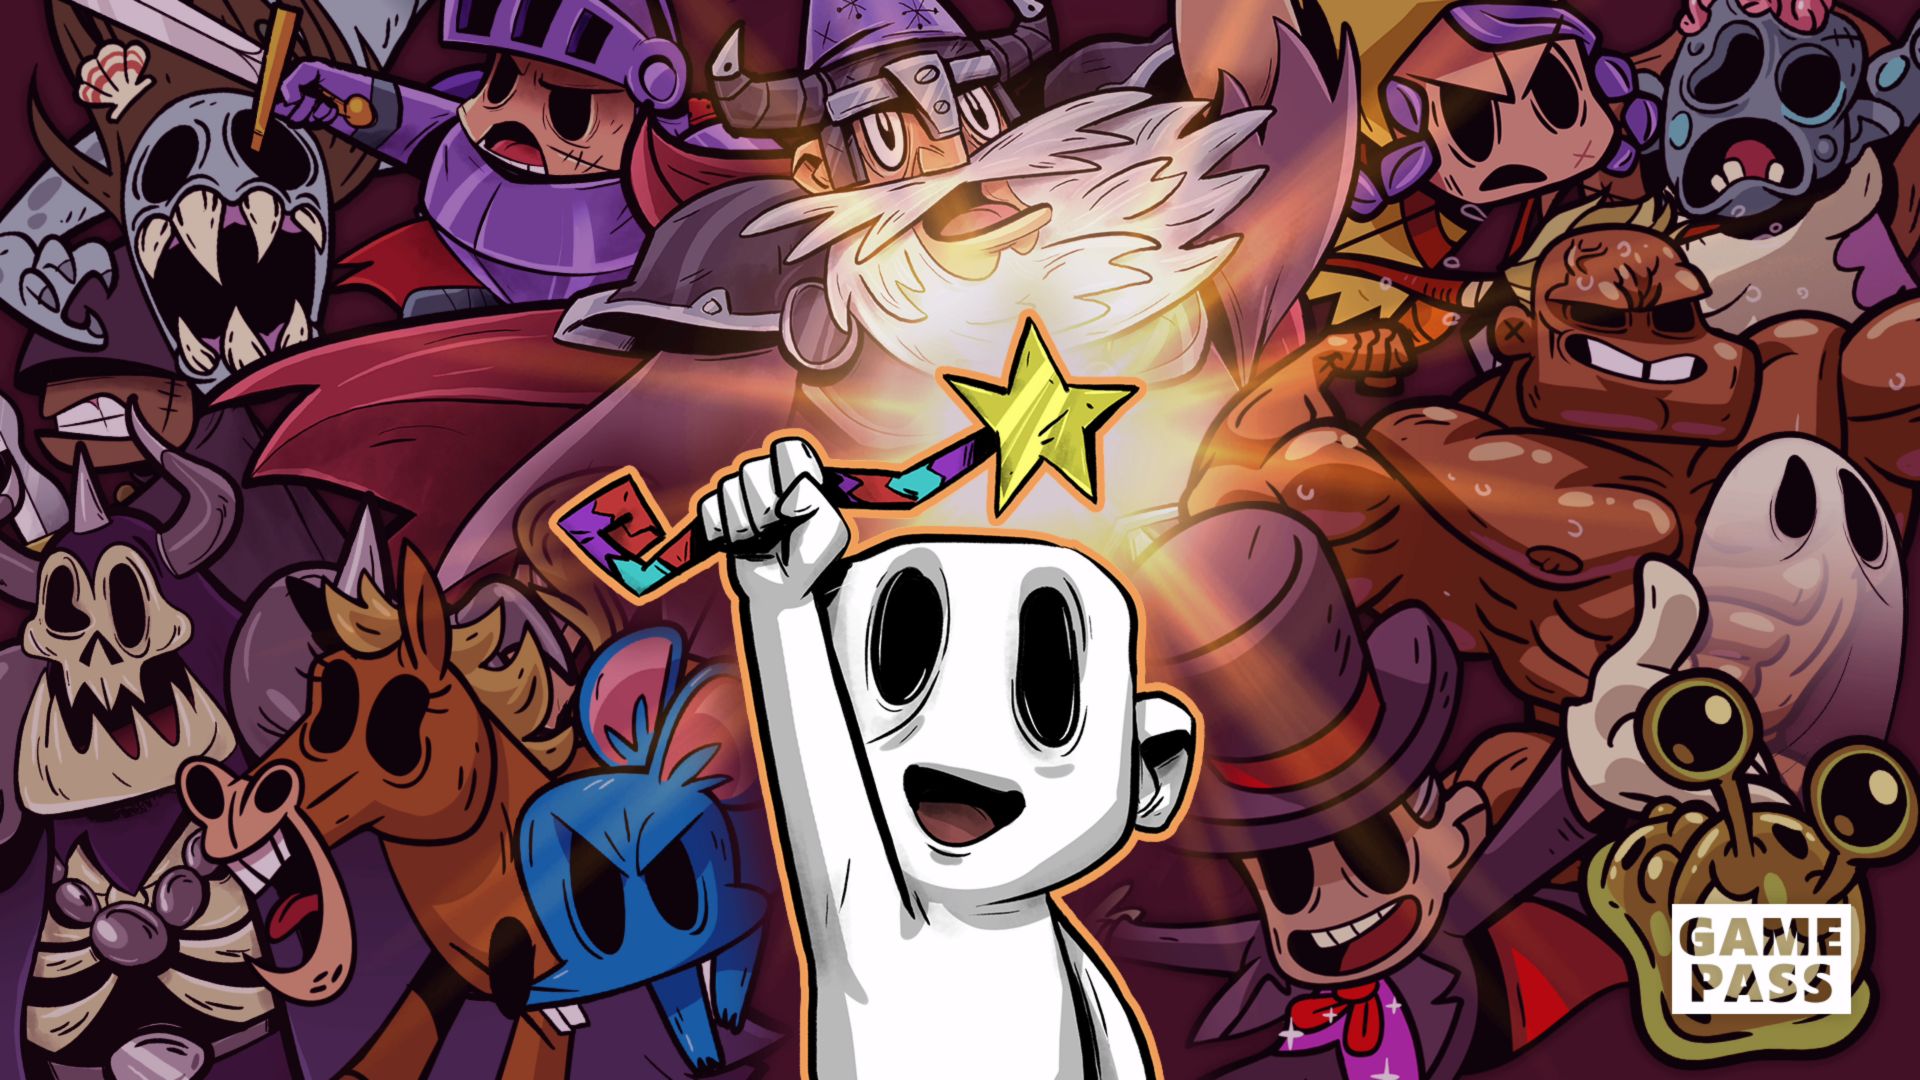 Co-Optimus - News - Castle Crashers Steam Giveaway!